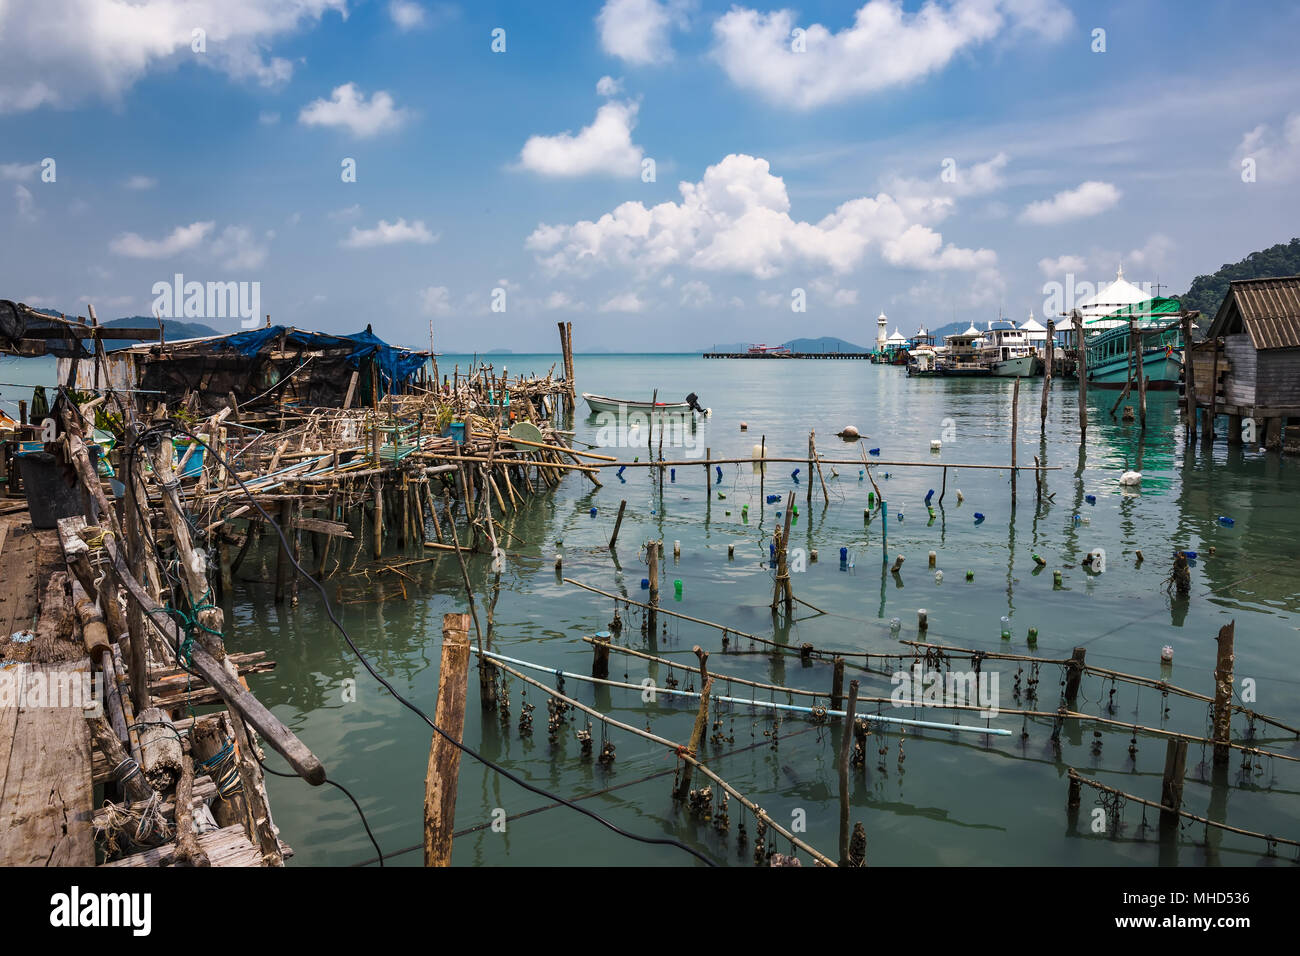 Bay in the fishing village of Bang Bao near the lighthouse Stock Photo